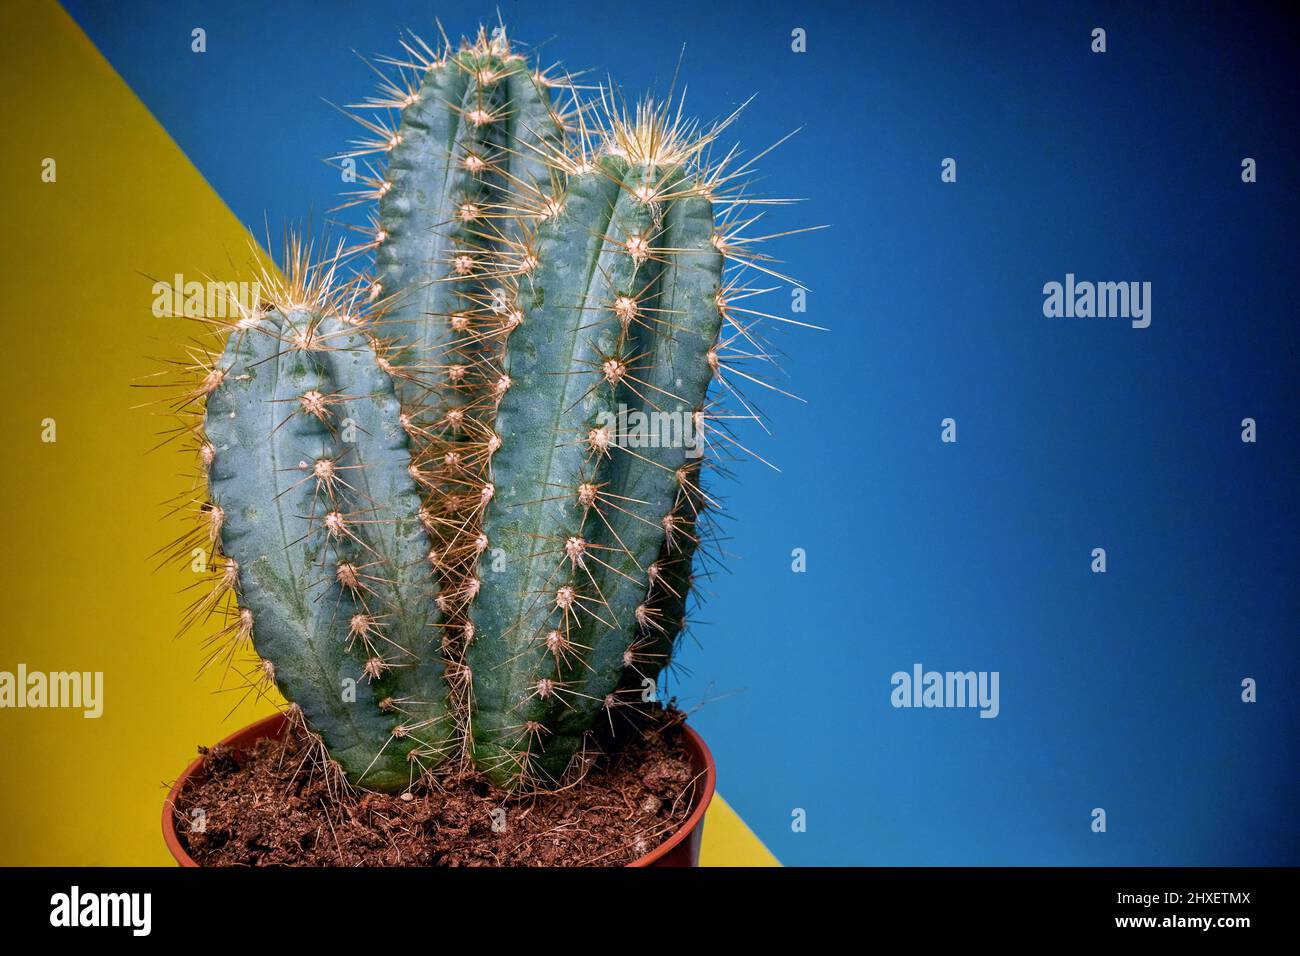 Close-up view of a cactus under the light in front of yellow-blue background. Natural, cactus, houseplant Stock Photo